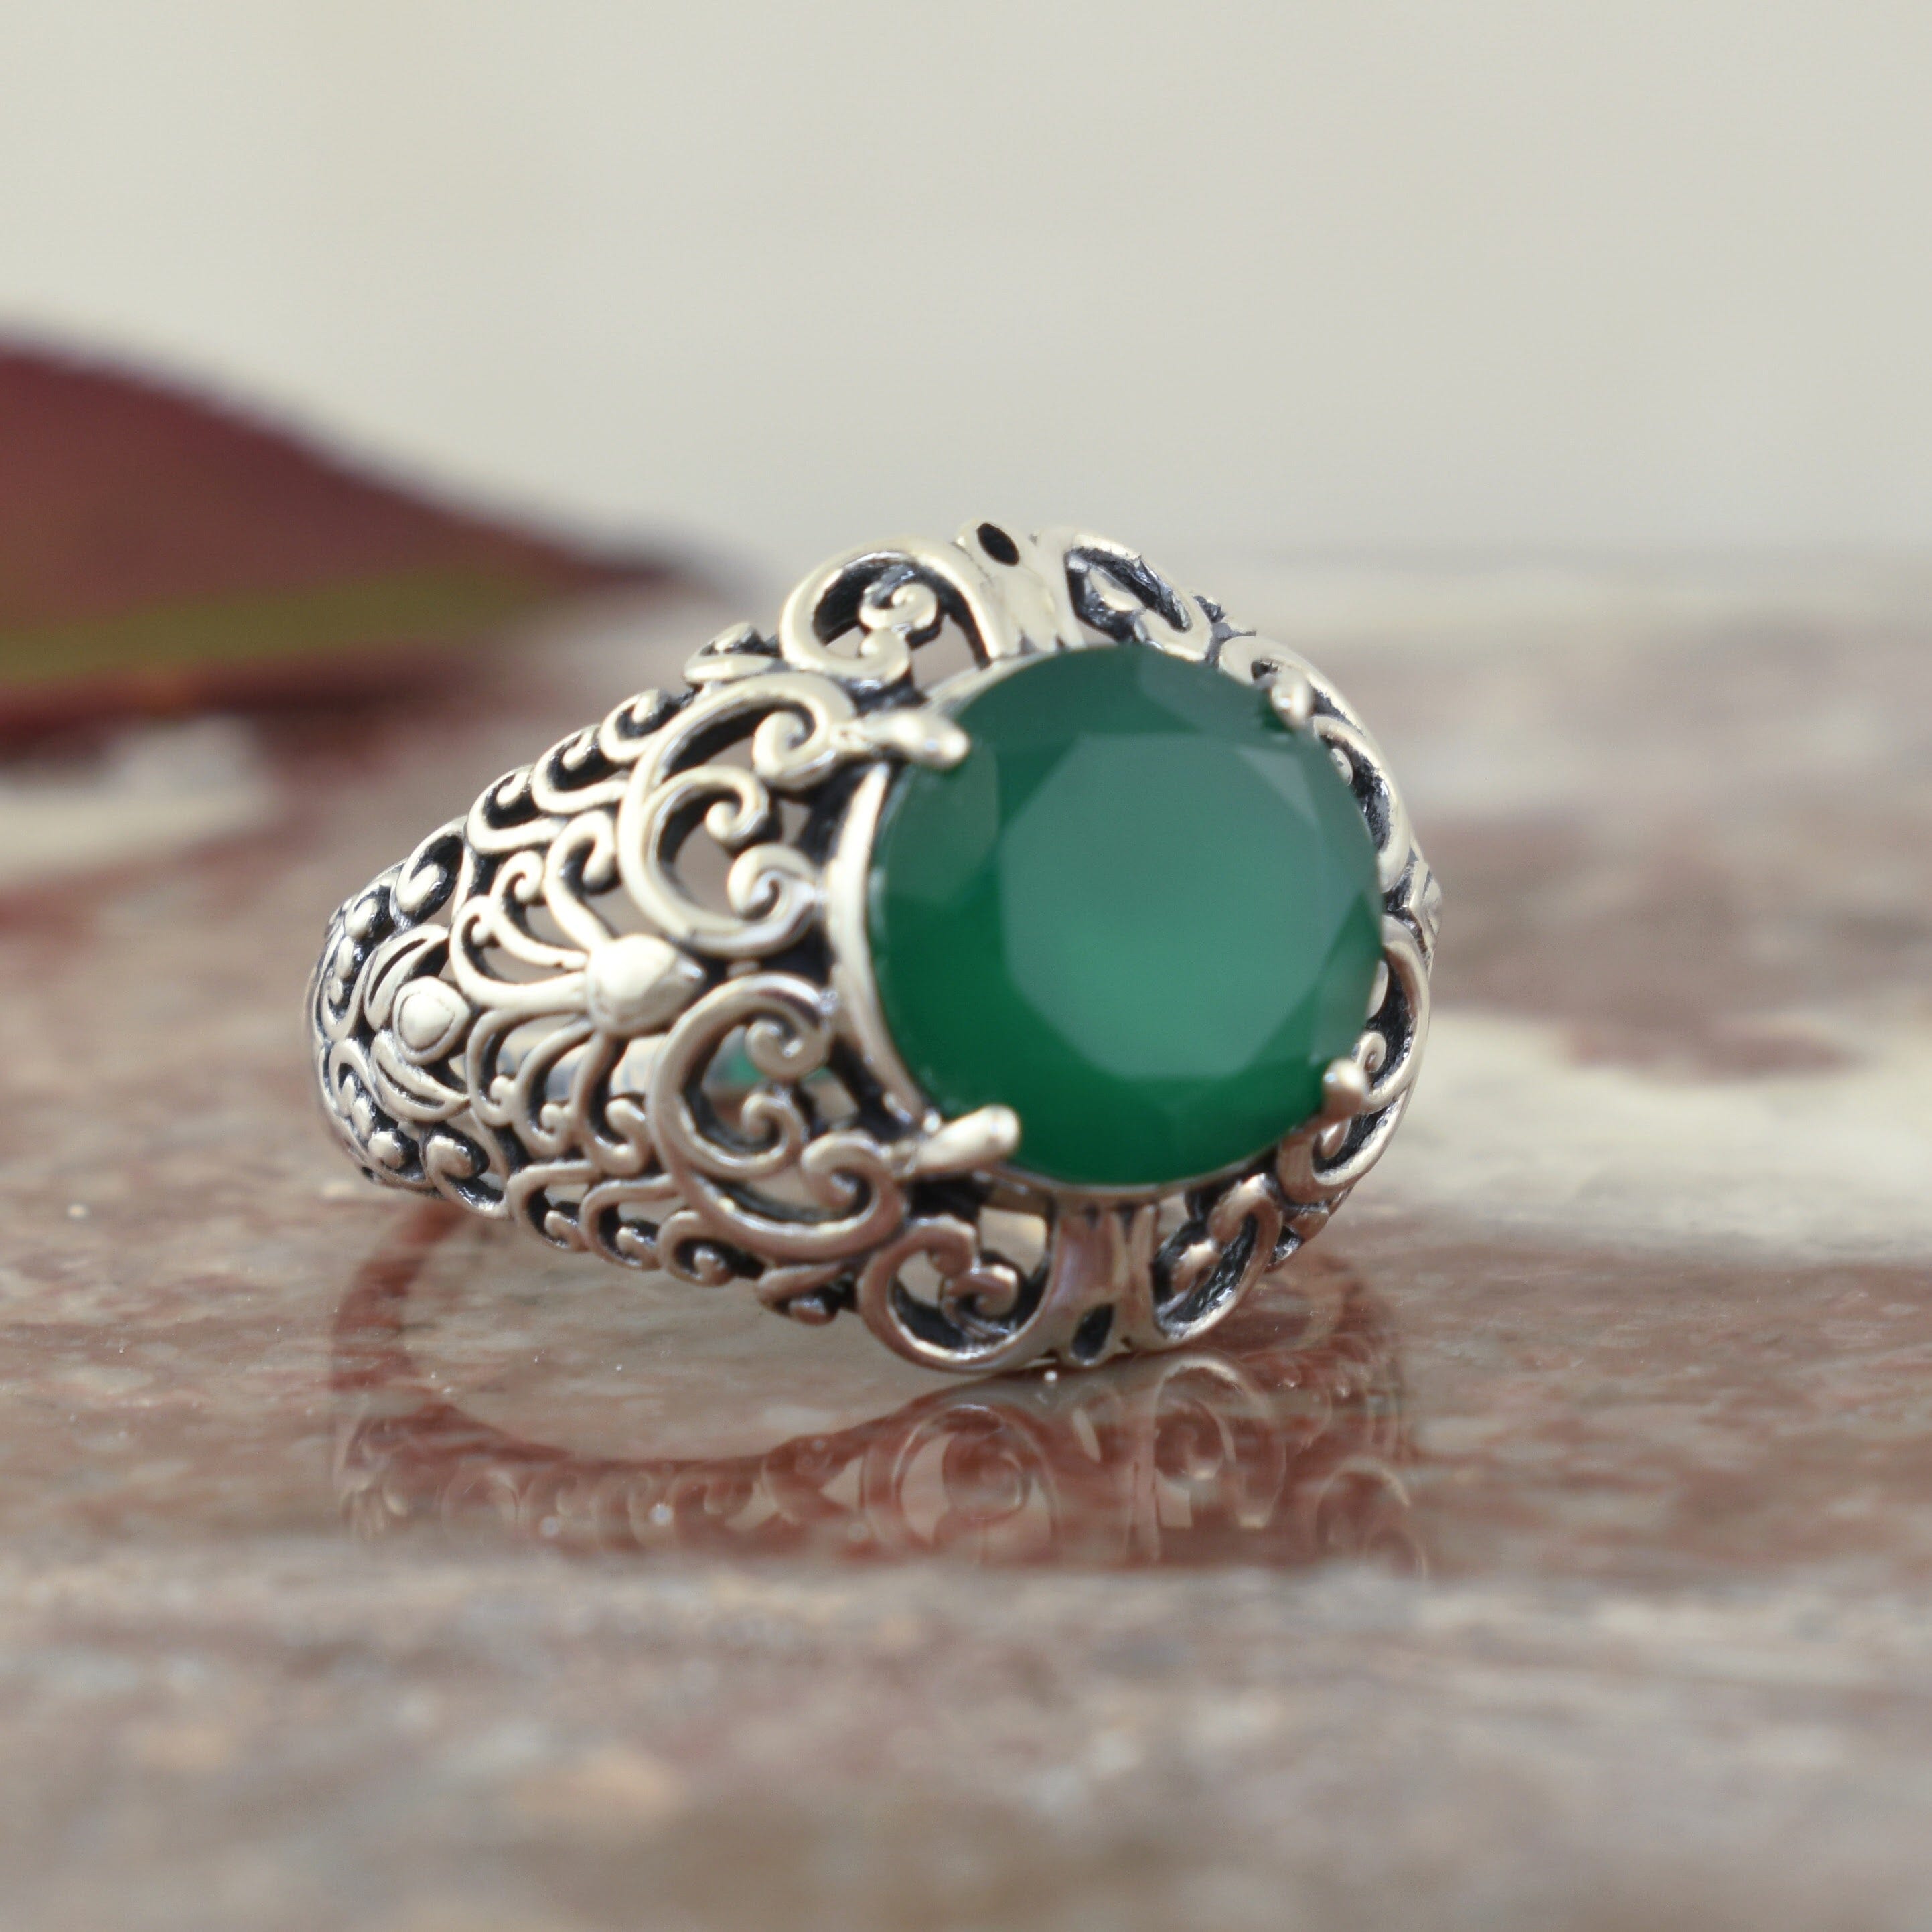 Green onyx ring set in .925 sterling silver